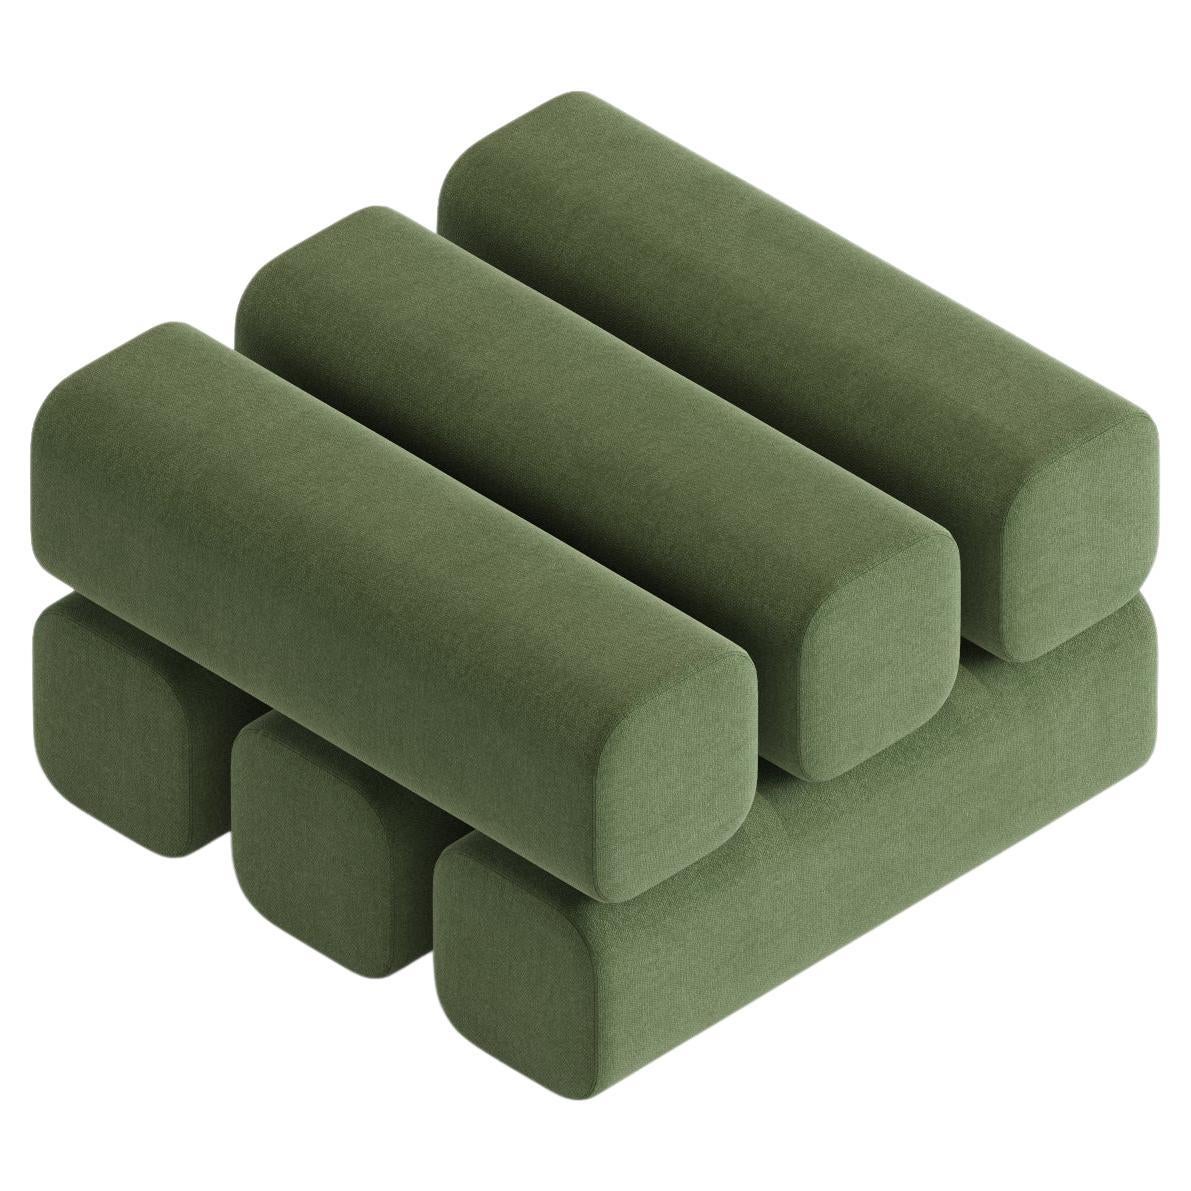 Ottoman pouf Drova 6 in Green color by Woo